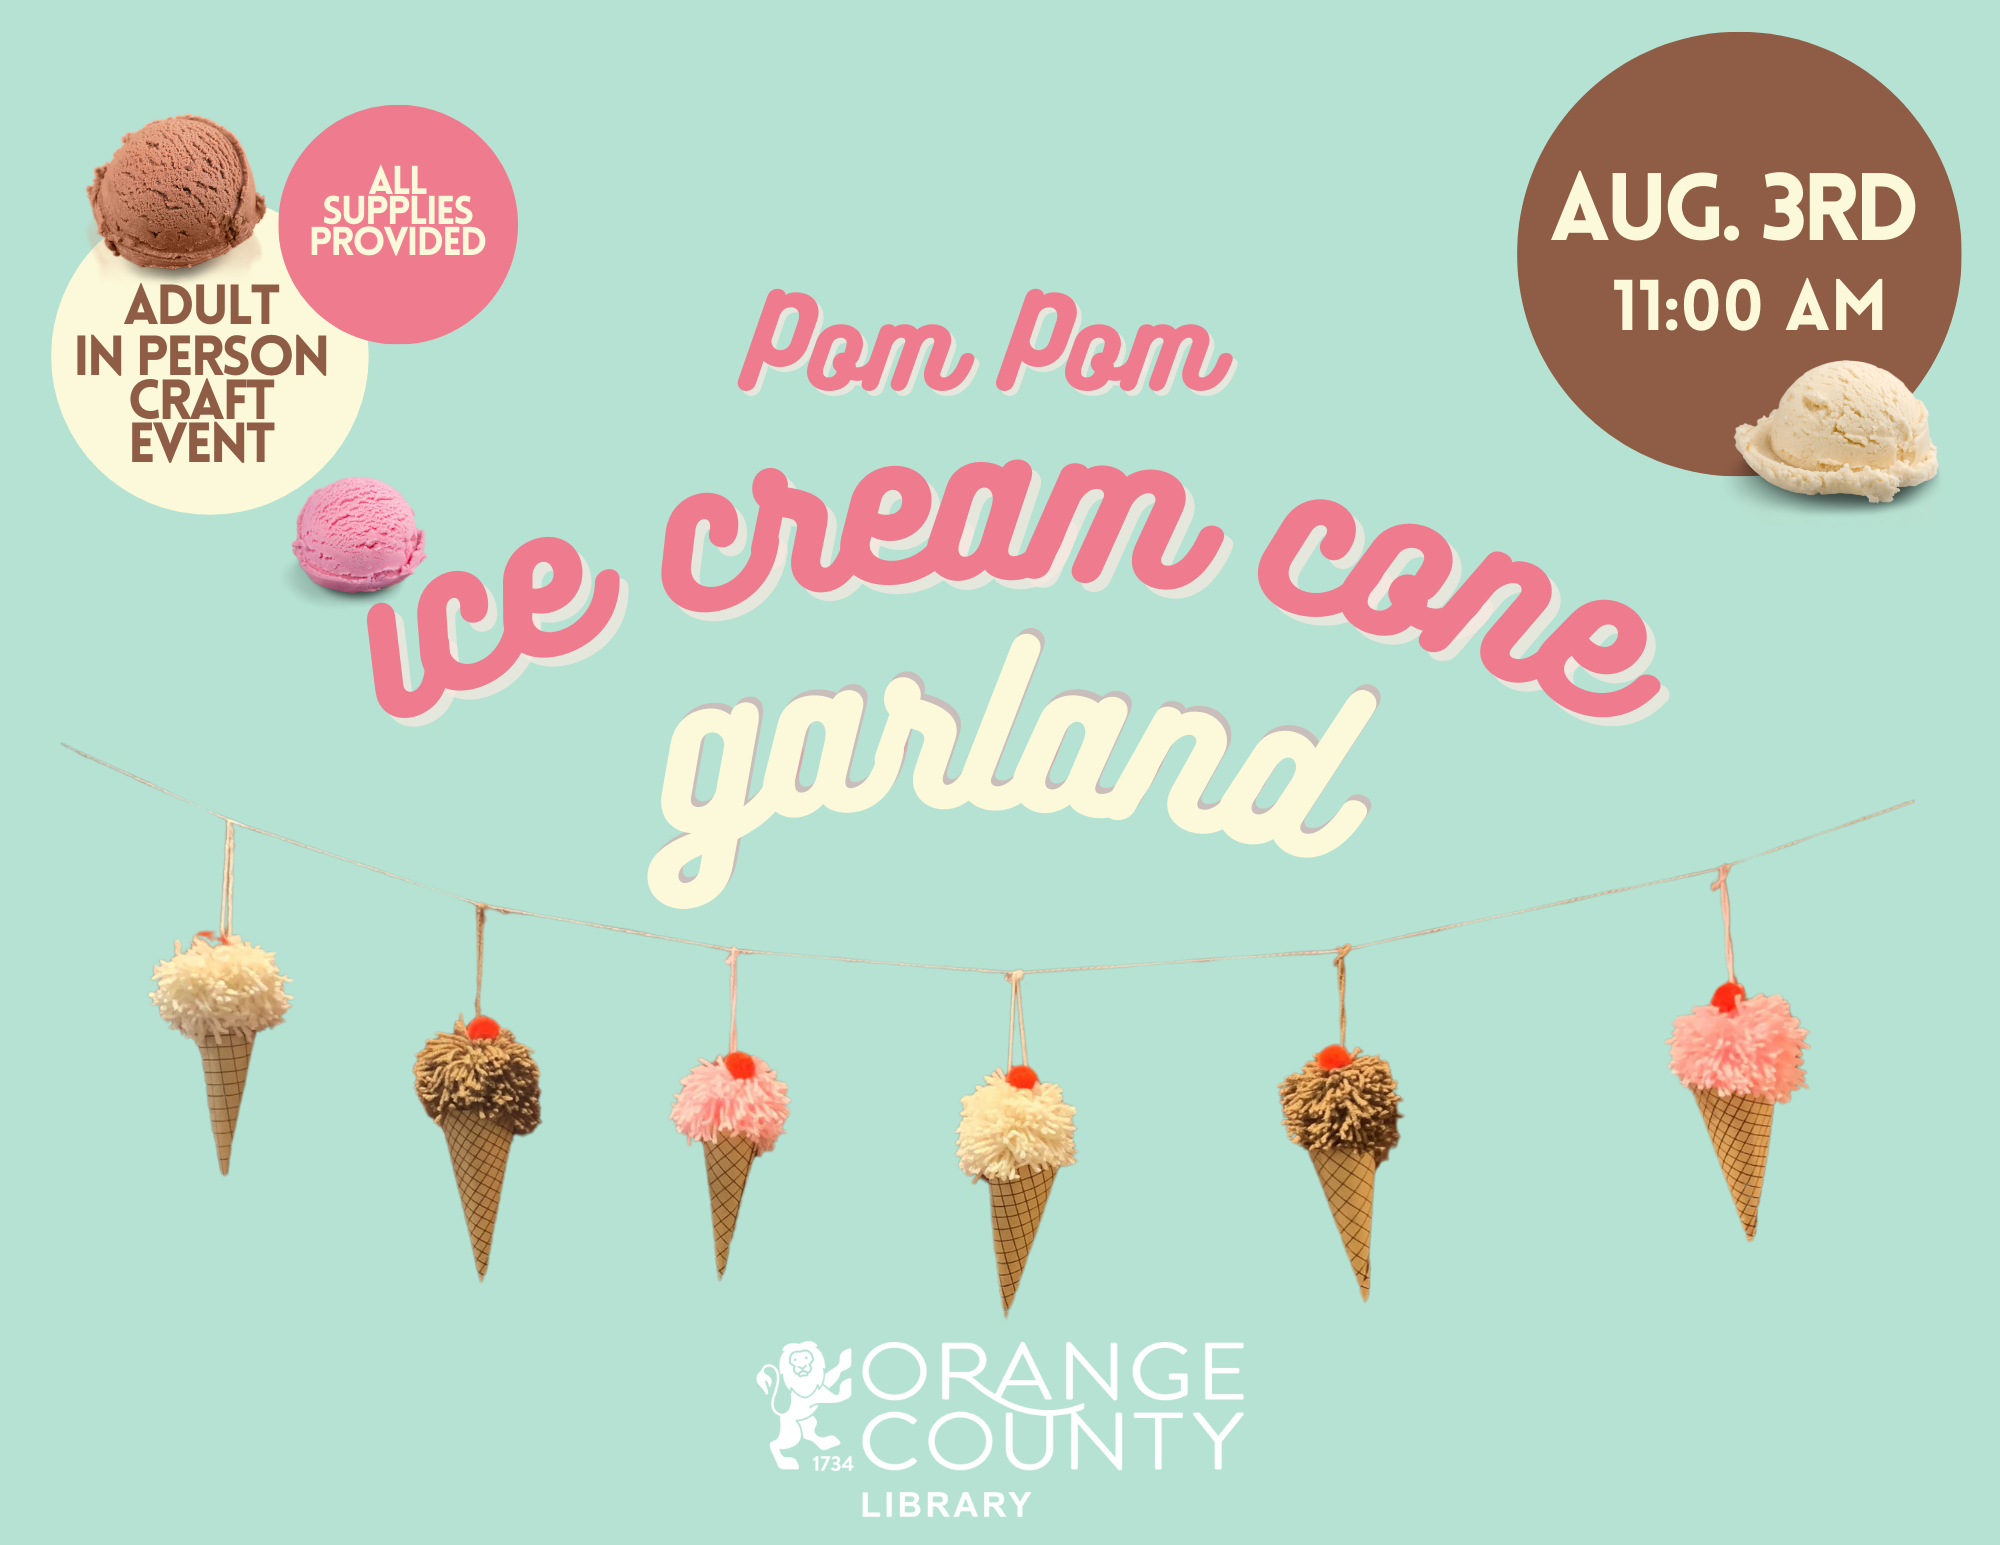 Pom Pom Ice Cream Cone Garland. Adult in-person craft event. All supplies provided. August 3rd 11:00 a.m. Pre-registration is required.